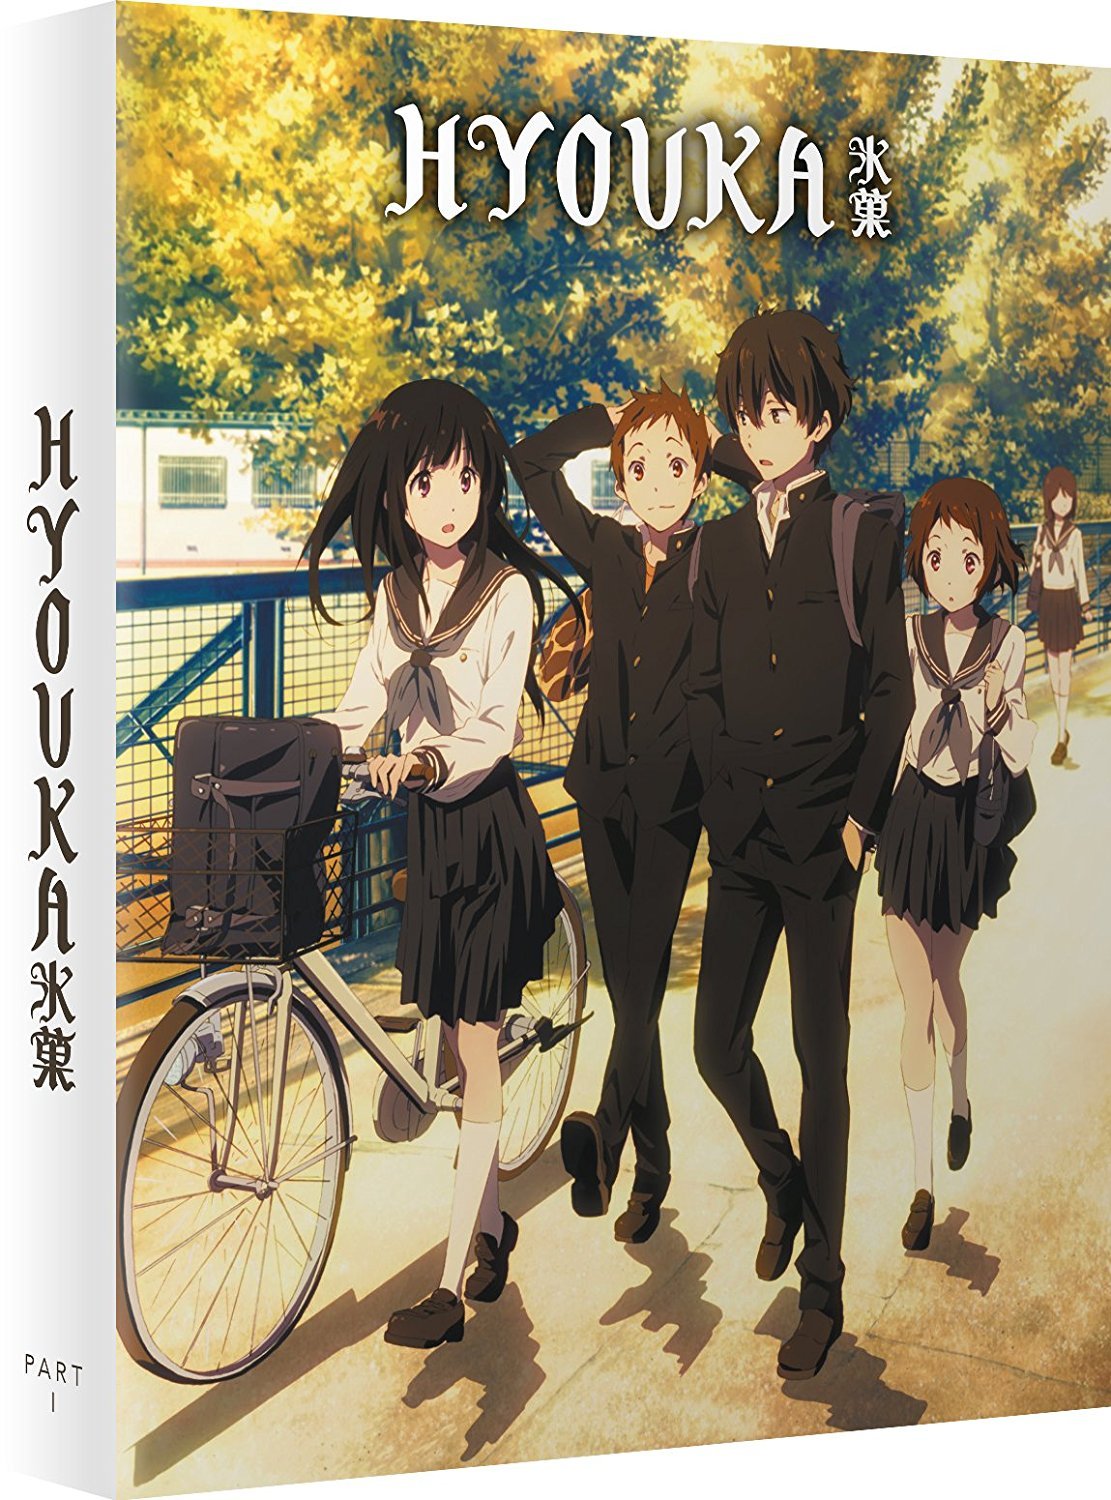 Hyouka Part 1 Review • Anime UK News